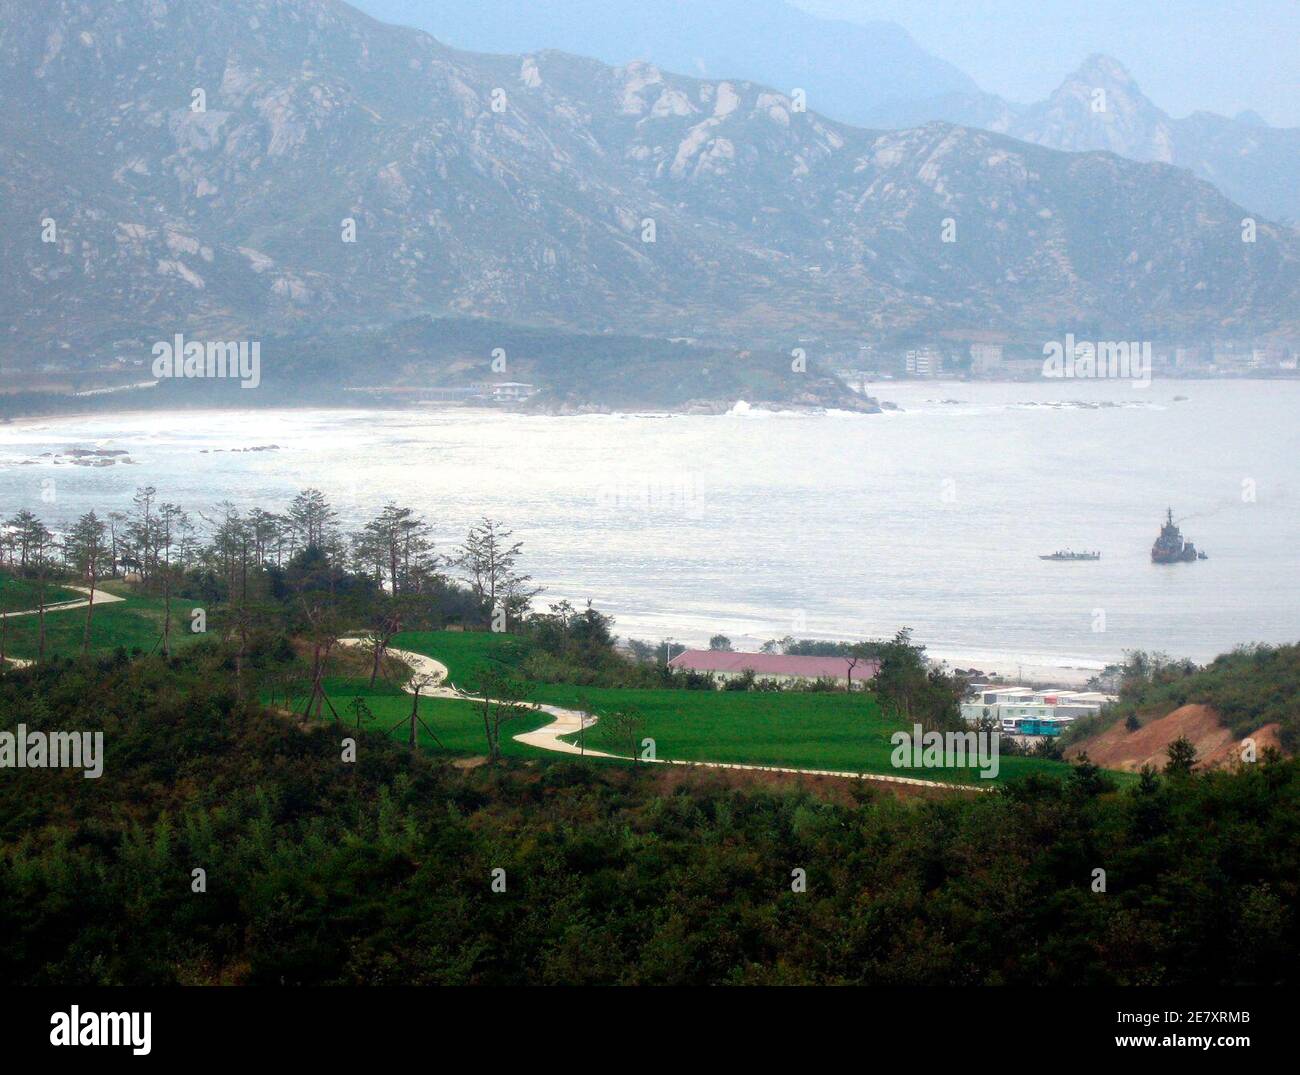 A view of the Diamond Country Club in North Korea's Mount Kumgang October 25, 2006. The golf course is set in the scenic Mount Kumgang range and close to the demilitarised zone (DMZ), a relic of the Cold War that has divided the Korean peninsula for more than half a century and either side of which are stationed more than one million troops. To match feature KOREA NORTH GOLF REUTERS/Jonathan Thatcher (NORTH KOREA) Stock Photo